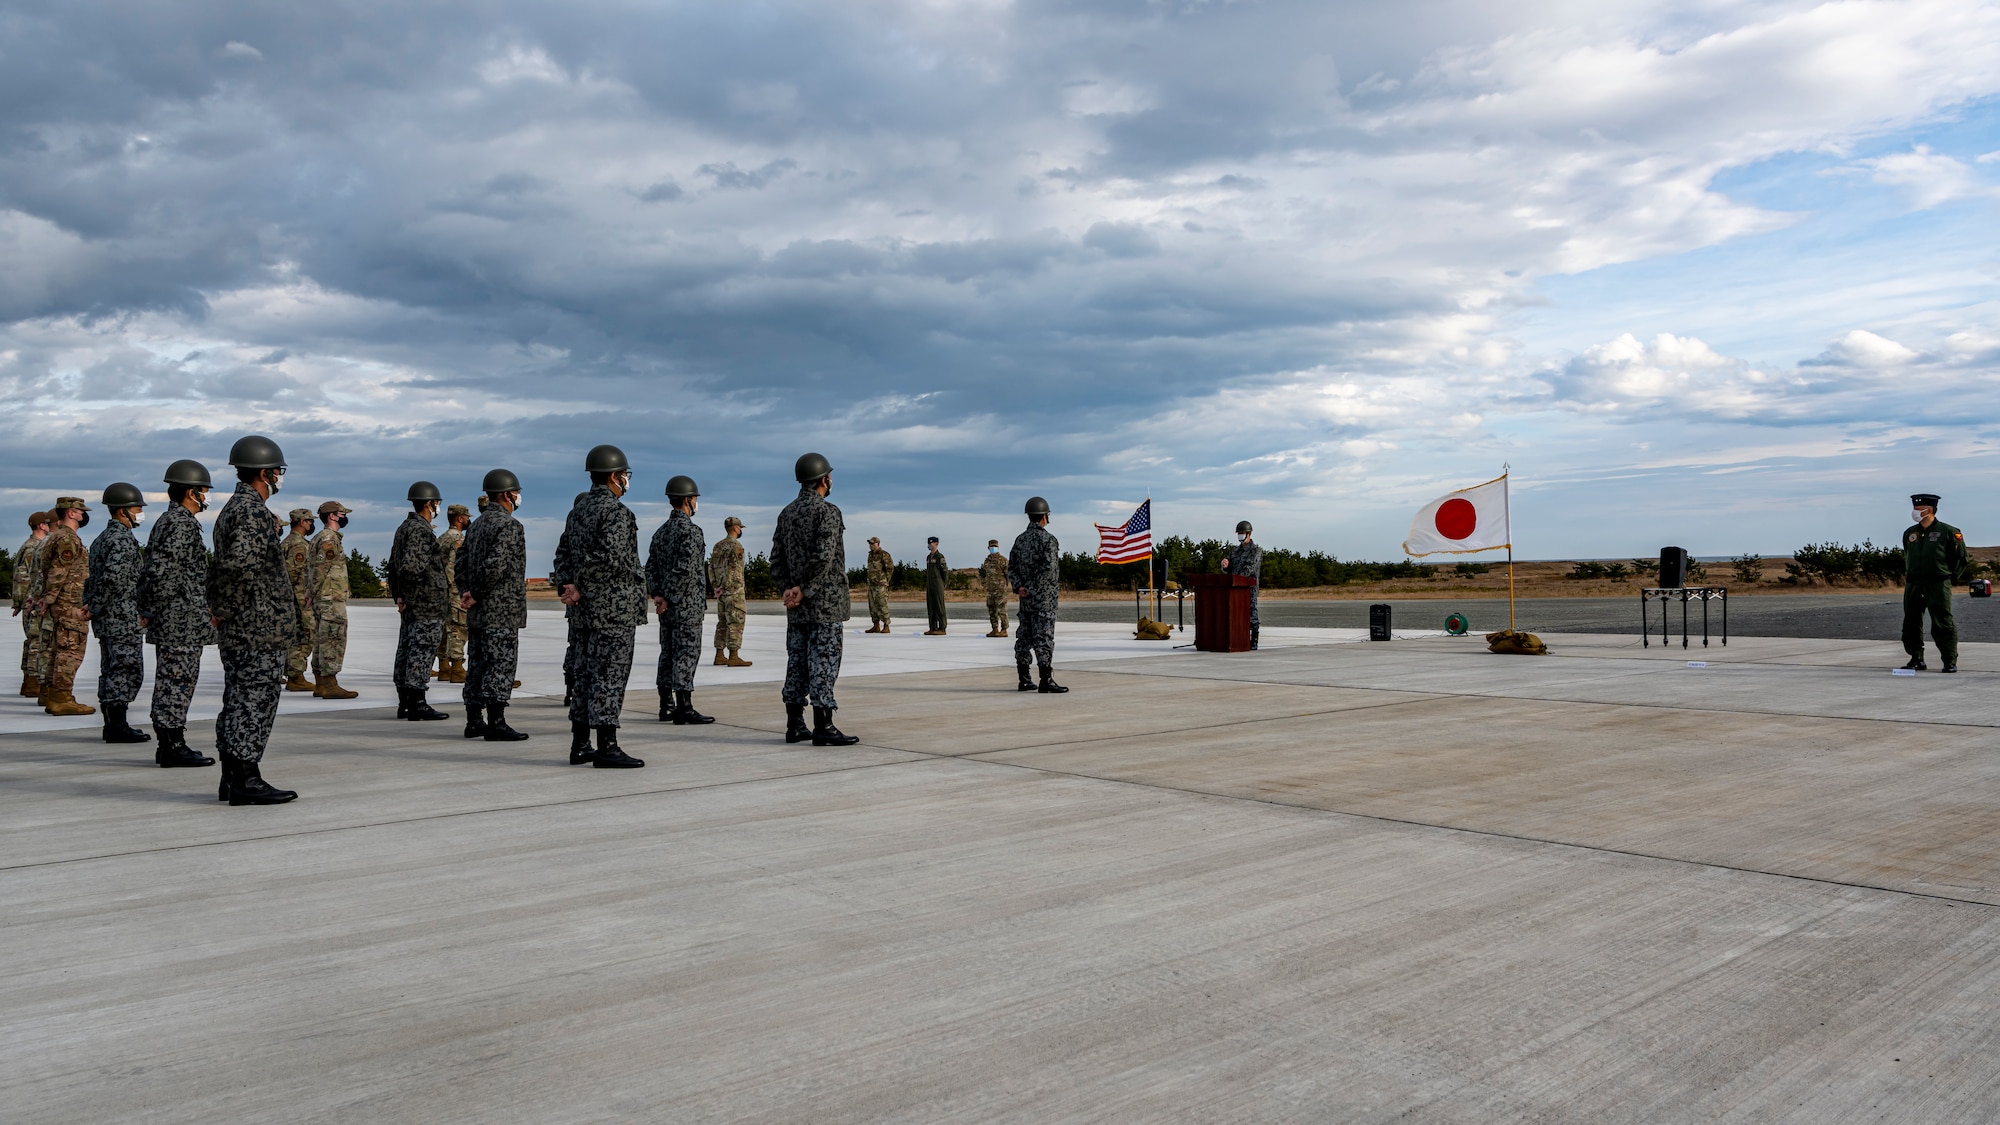 U.S. Air Force and Japan Air Self-Defense Force members, assigned to the 35th Civil Engineer Squadron and the Northern Air Civil Engineering Group, attend a ceremony to commemorate the completion of a bilateral Rapid Airfield Damage Recovery (RADR) pad at Draughon Range near Misawa Air Base, Japan, Nov. 29, 2022.